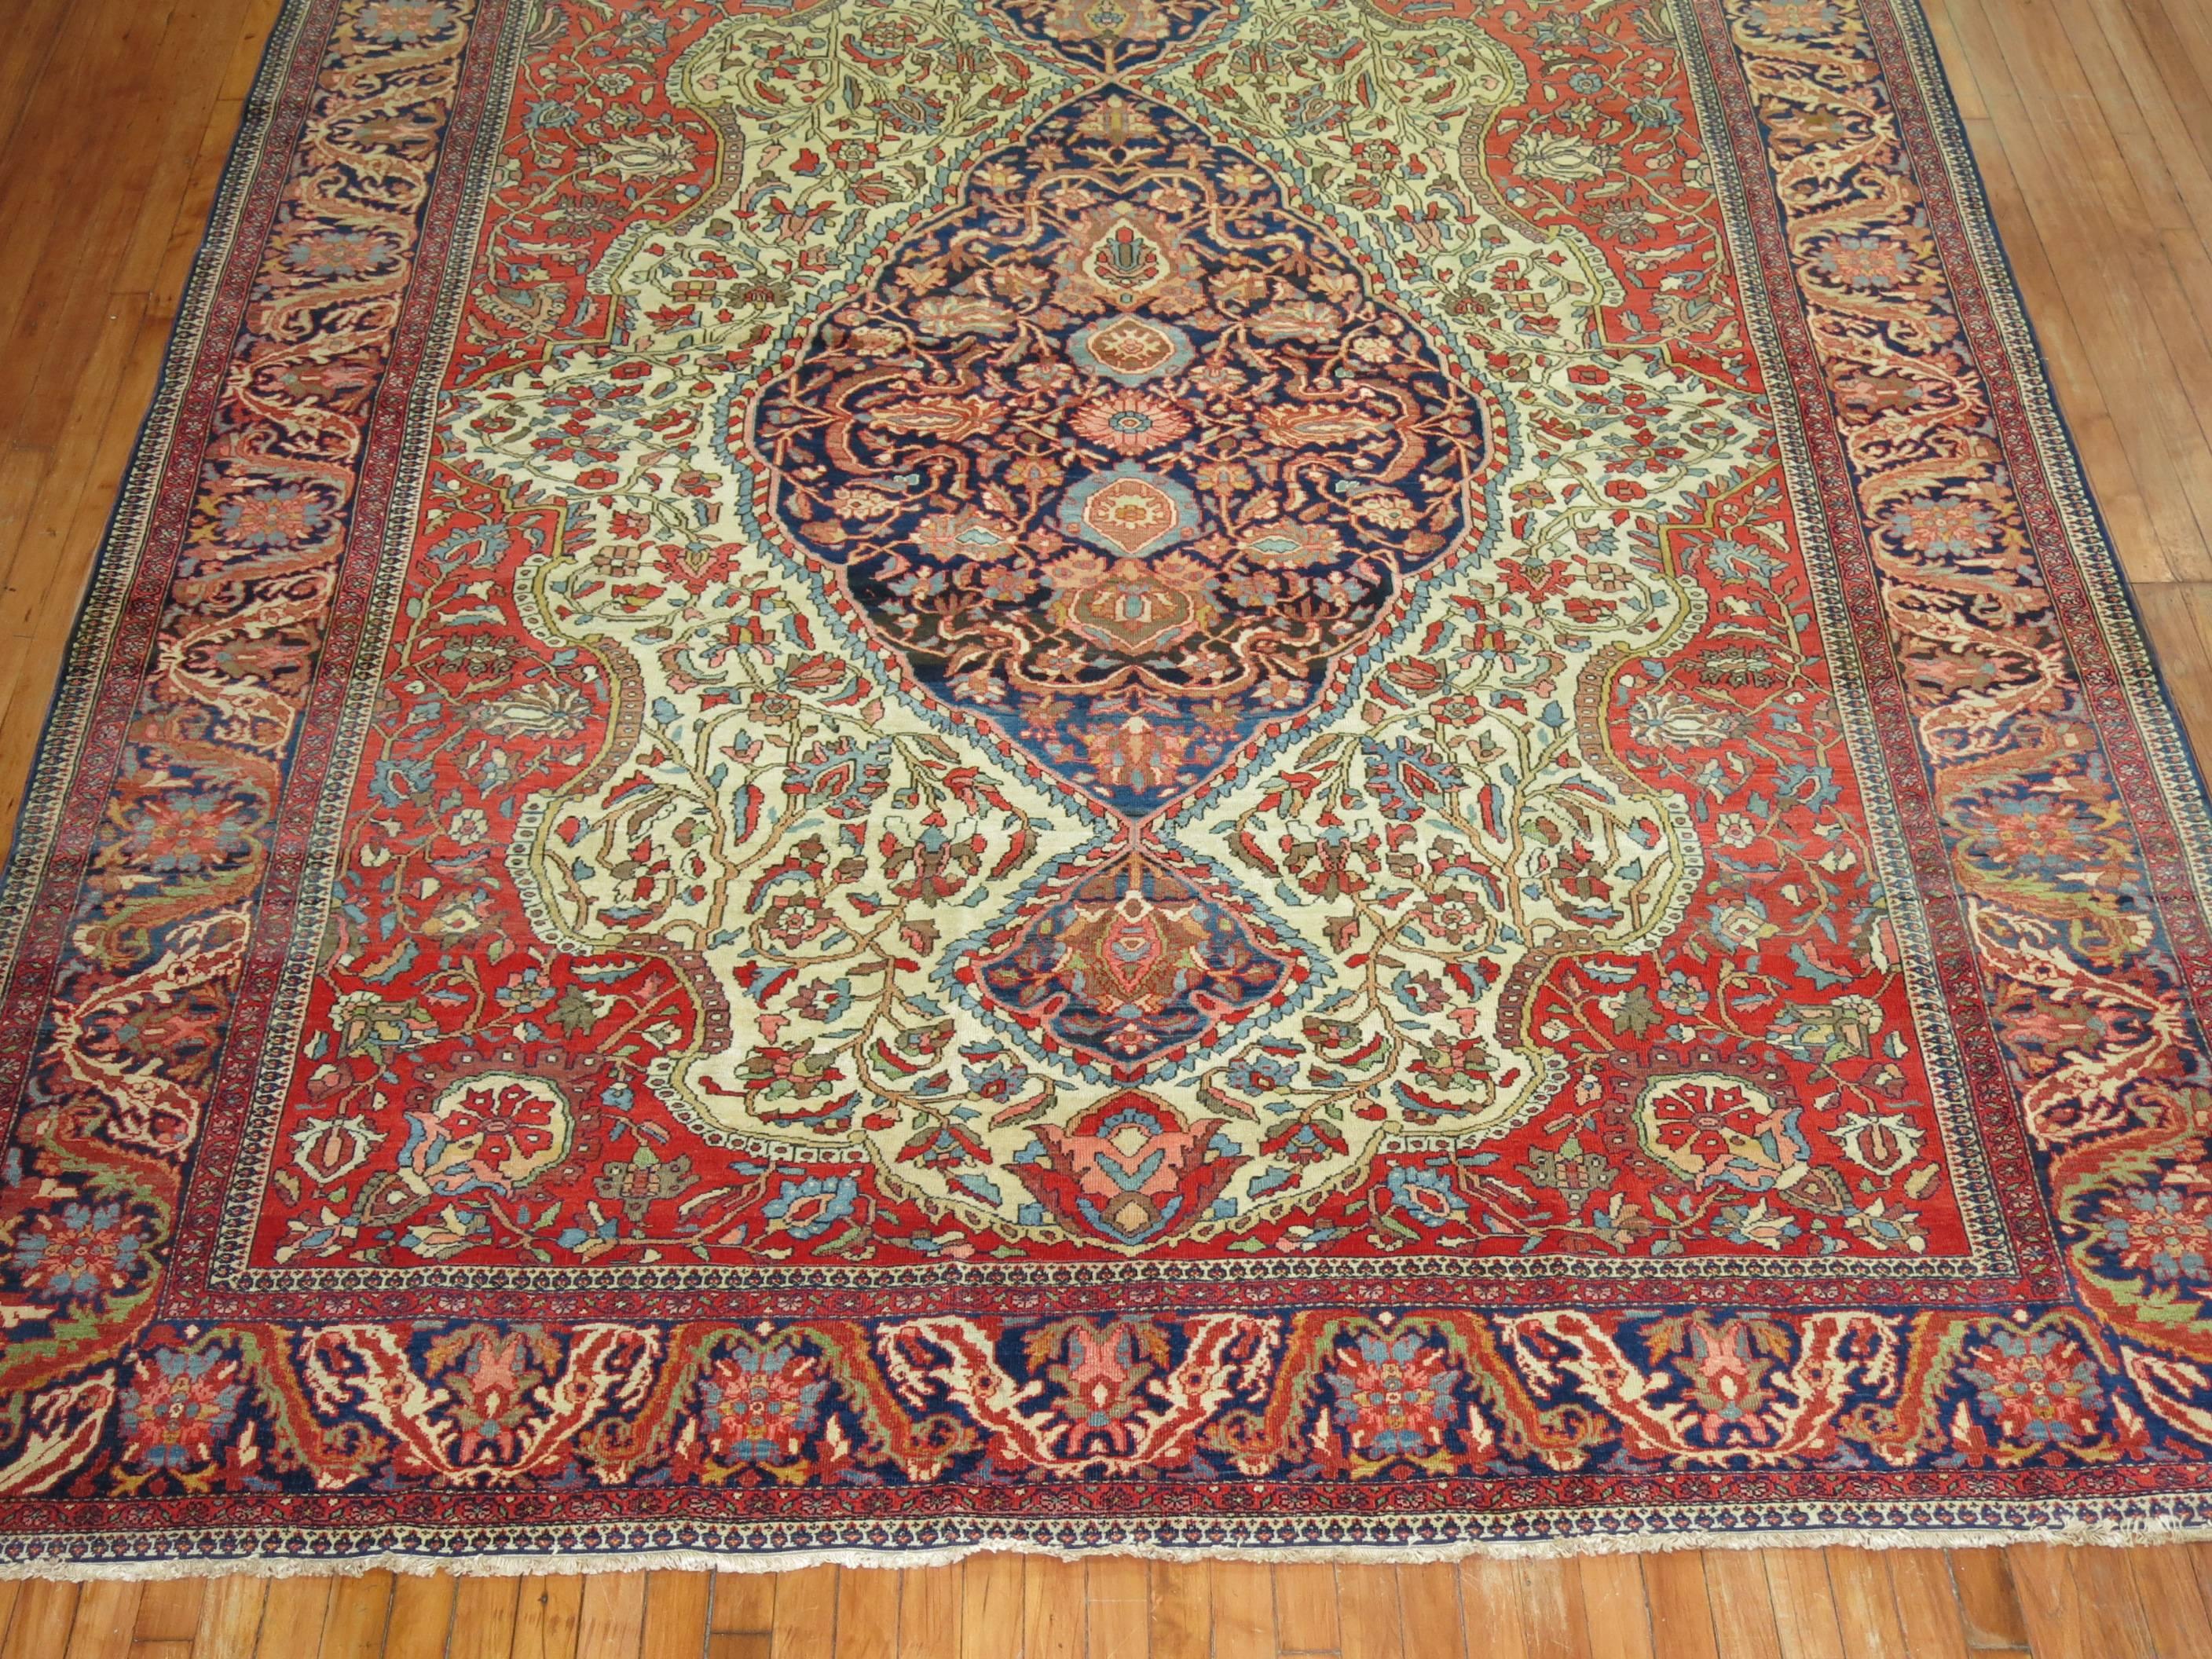 An authentic early 20th century Sarouk Ferahan carpet with classic medallion and border design. 

Investment-level Ferahan rugs were not produced after the 1910s, and the finer 19th and turn-of-the 20th century examples have become quite rare. The